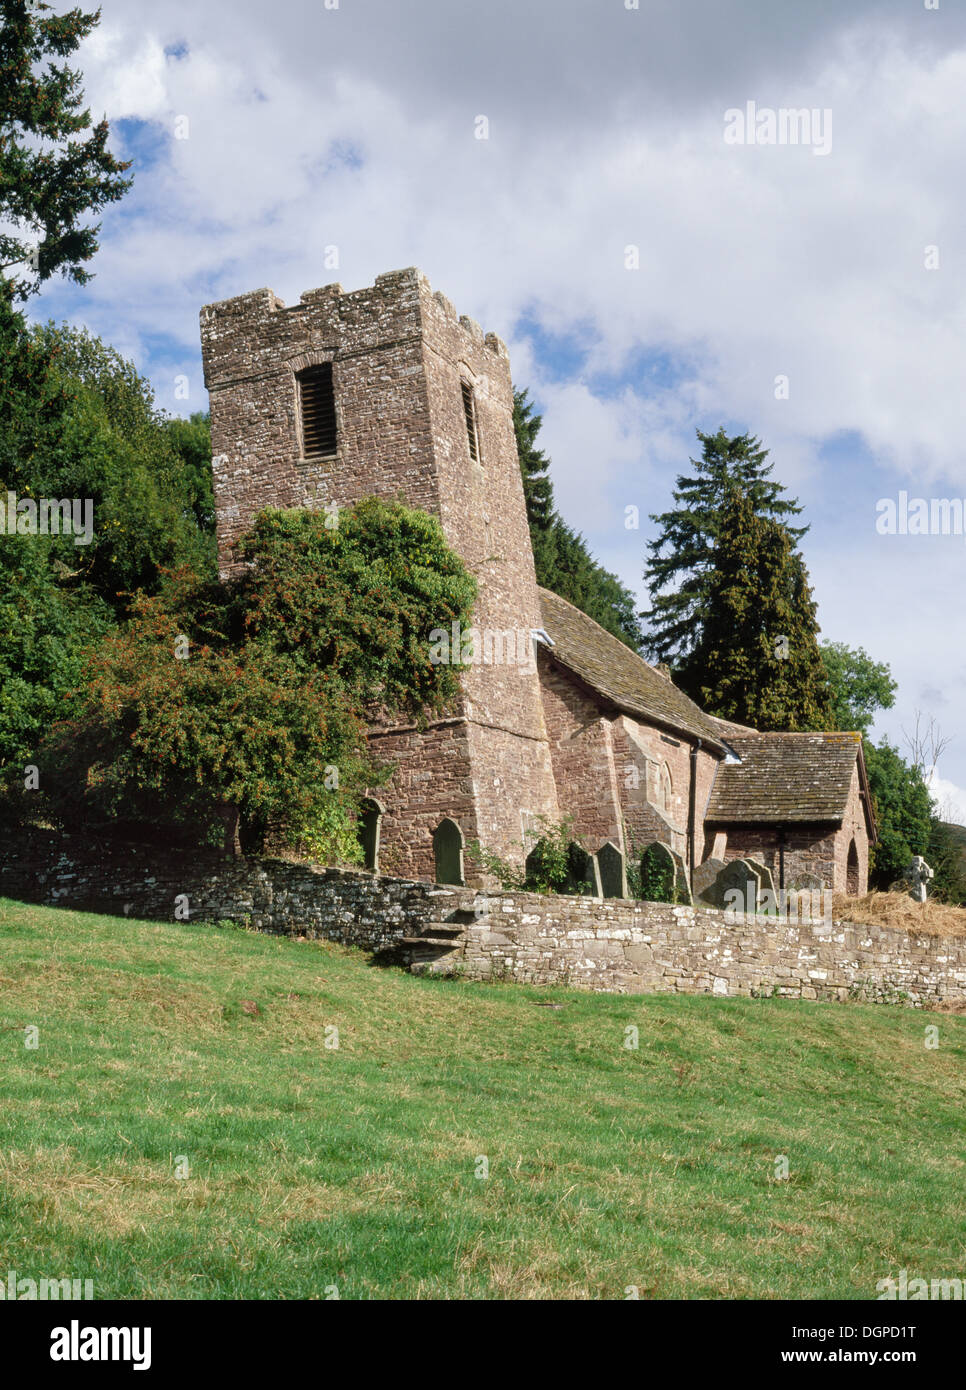 Tower and chancel of Cwmyoy Medieval church, Monmouthshire, have been twisted in opposite directions by slippage of the loose sandstone hillside. Stock Photo